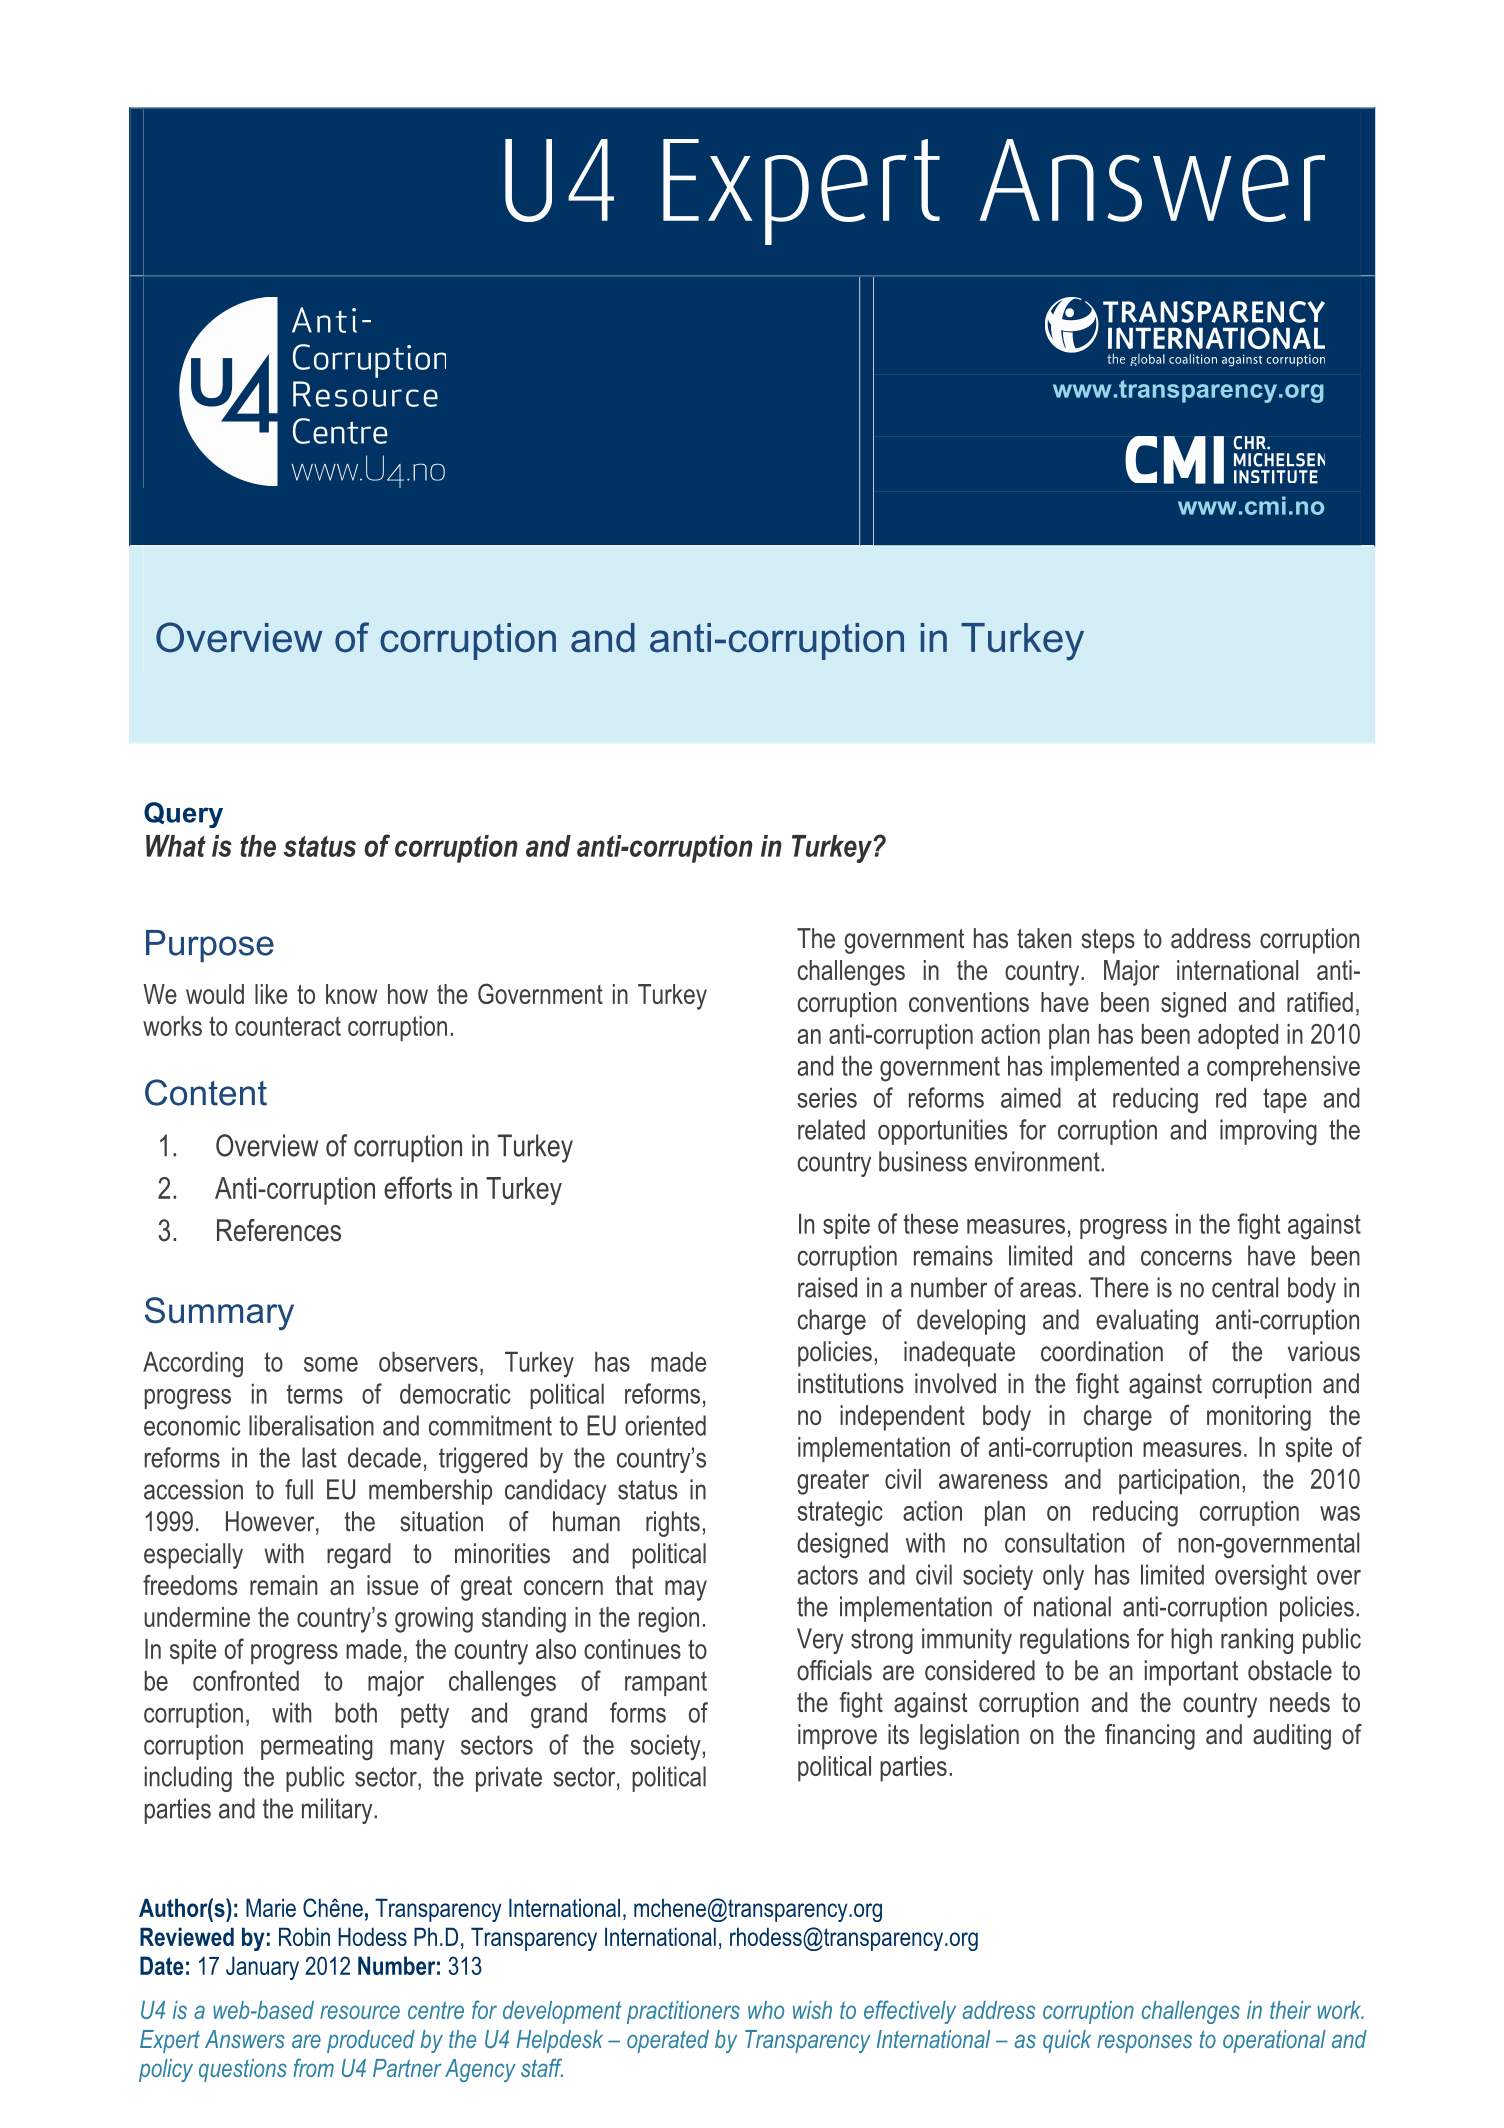 Overview of corruption and anti-corruption in Turkey